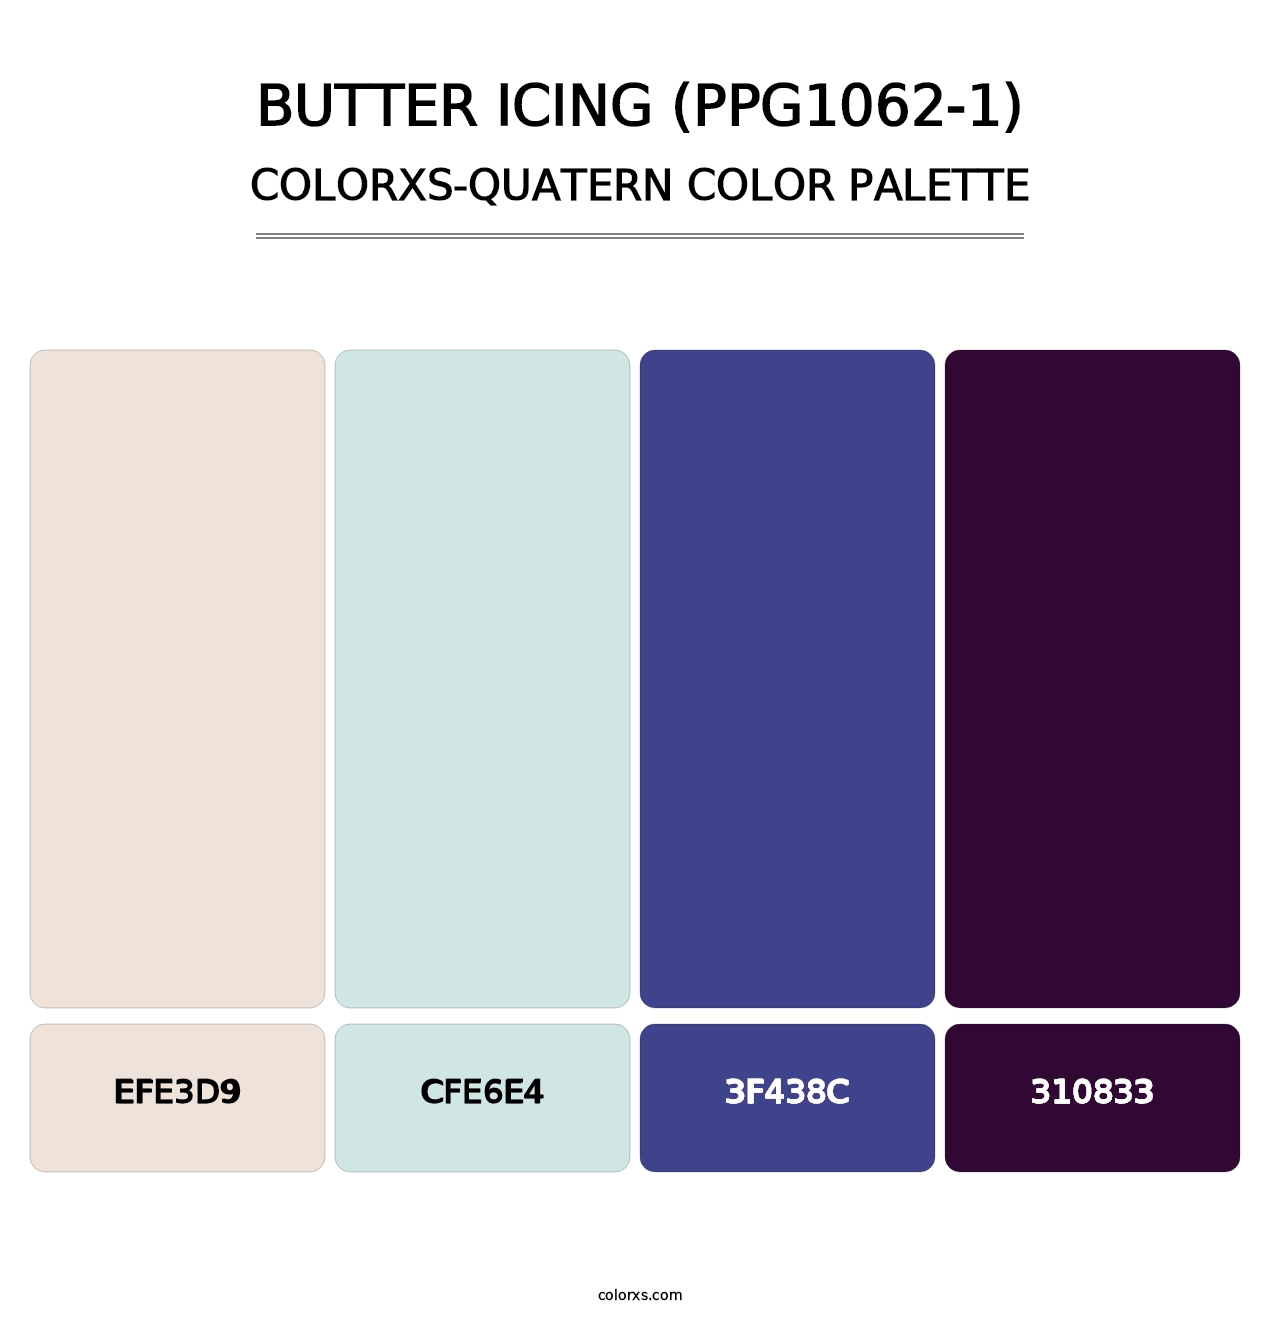 Butter Icing (PPG1062-1) - Colorxs Quatern Palette